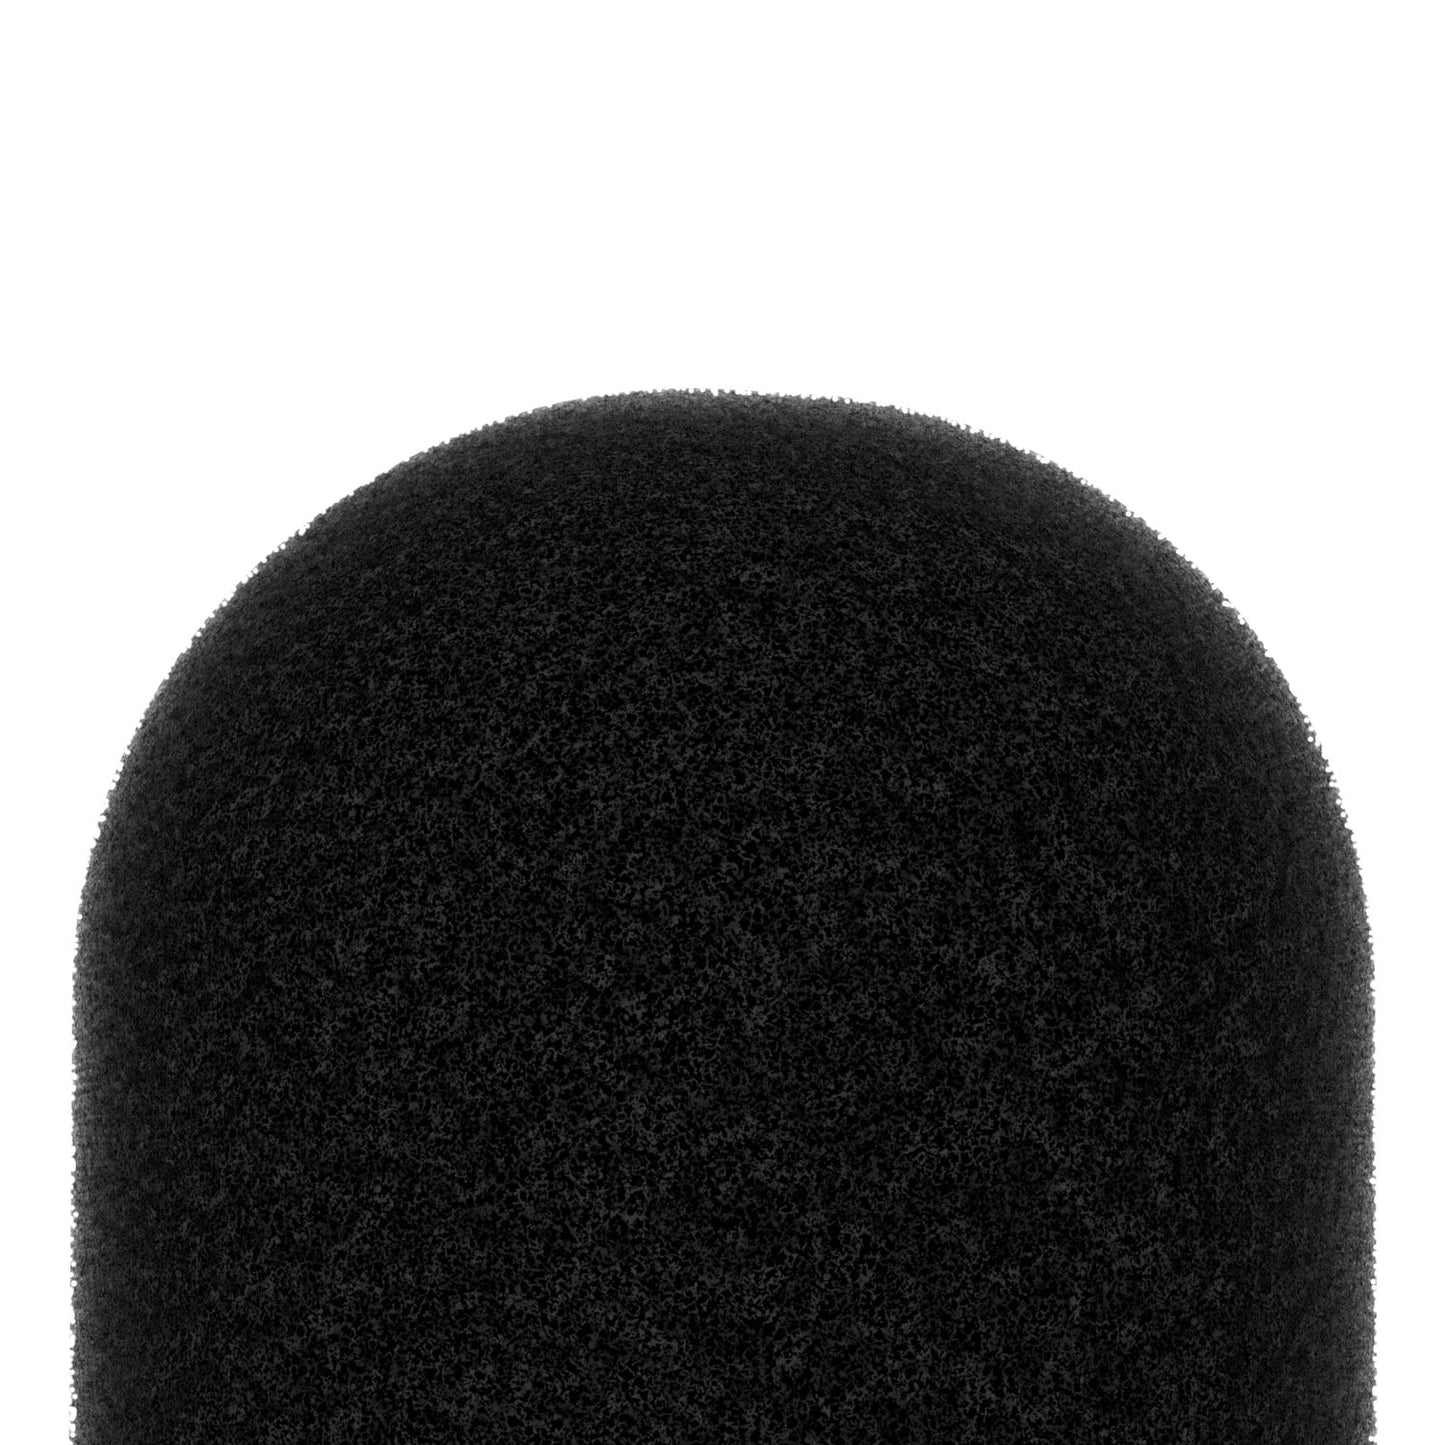 Foam Cover for Lavalier Lapel Microphone-10 Pack